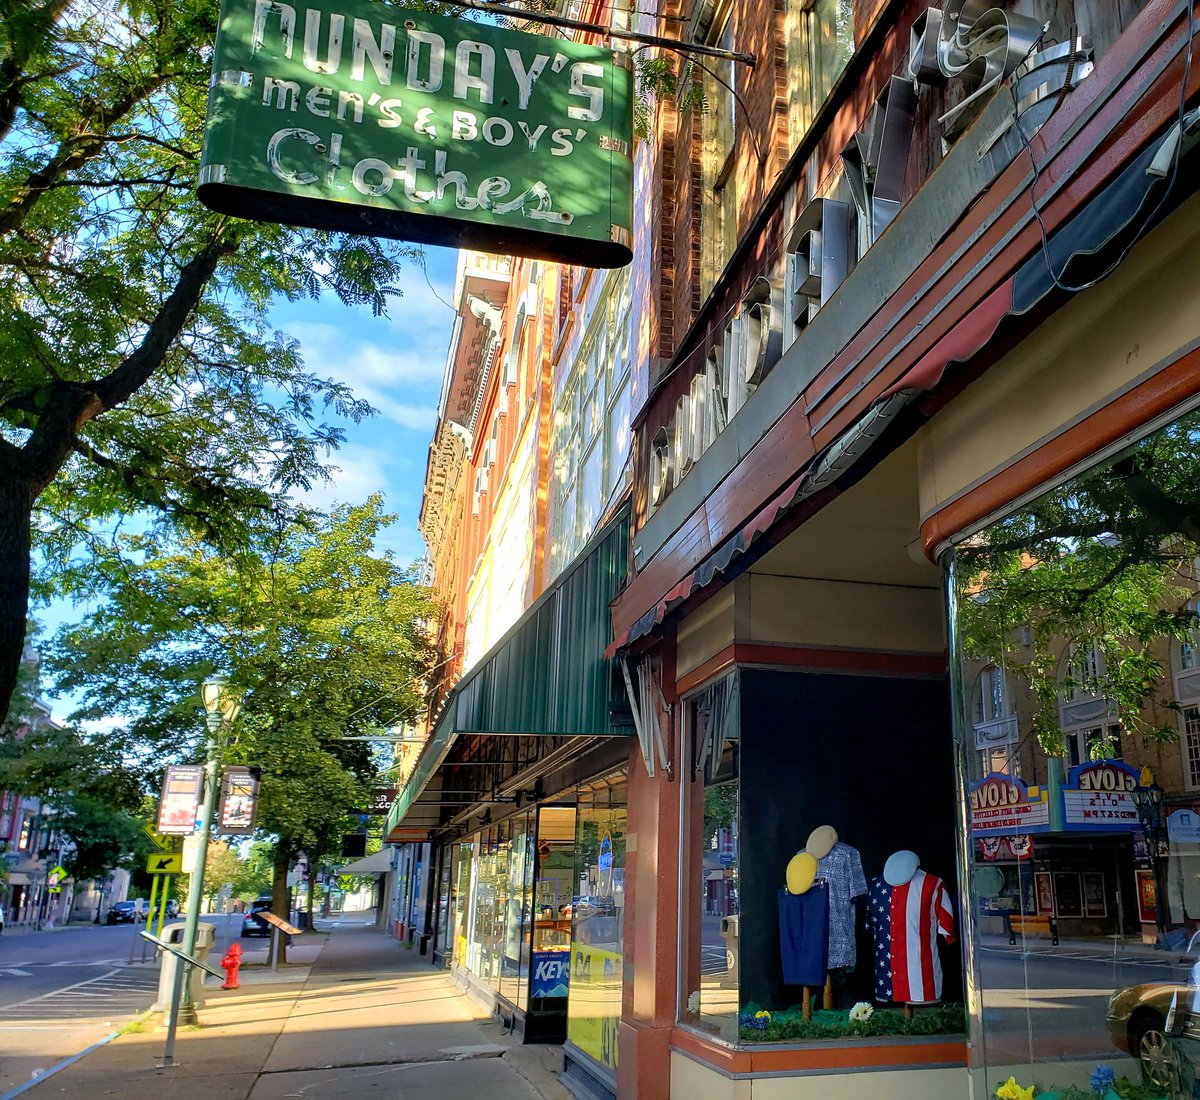 It is prom and wedding season and that means Dundays at 49 N. Main St., can help with tuxedo needs. A staple in Downtown Gloversville, it has been under the direction of the Gillis family for some 50 years (and earlier under owner Roger Dunn) In addition to formal men’s wear. T